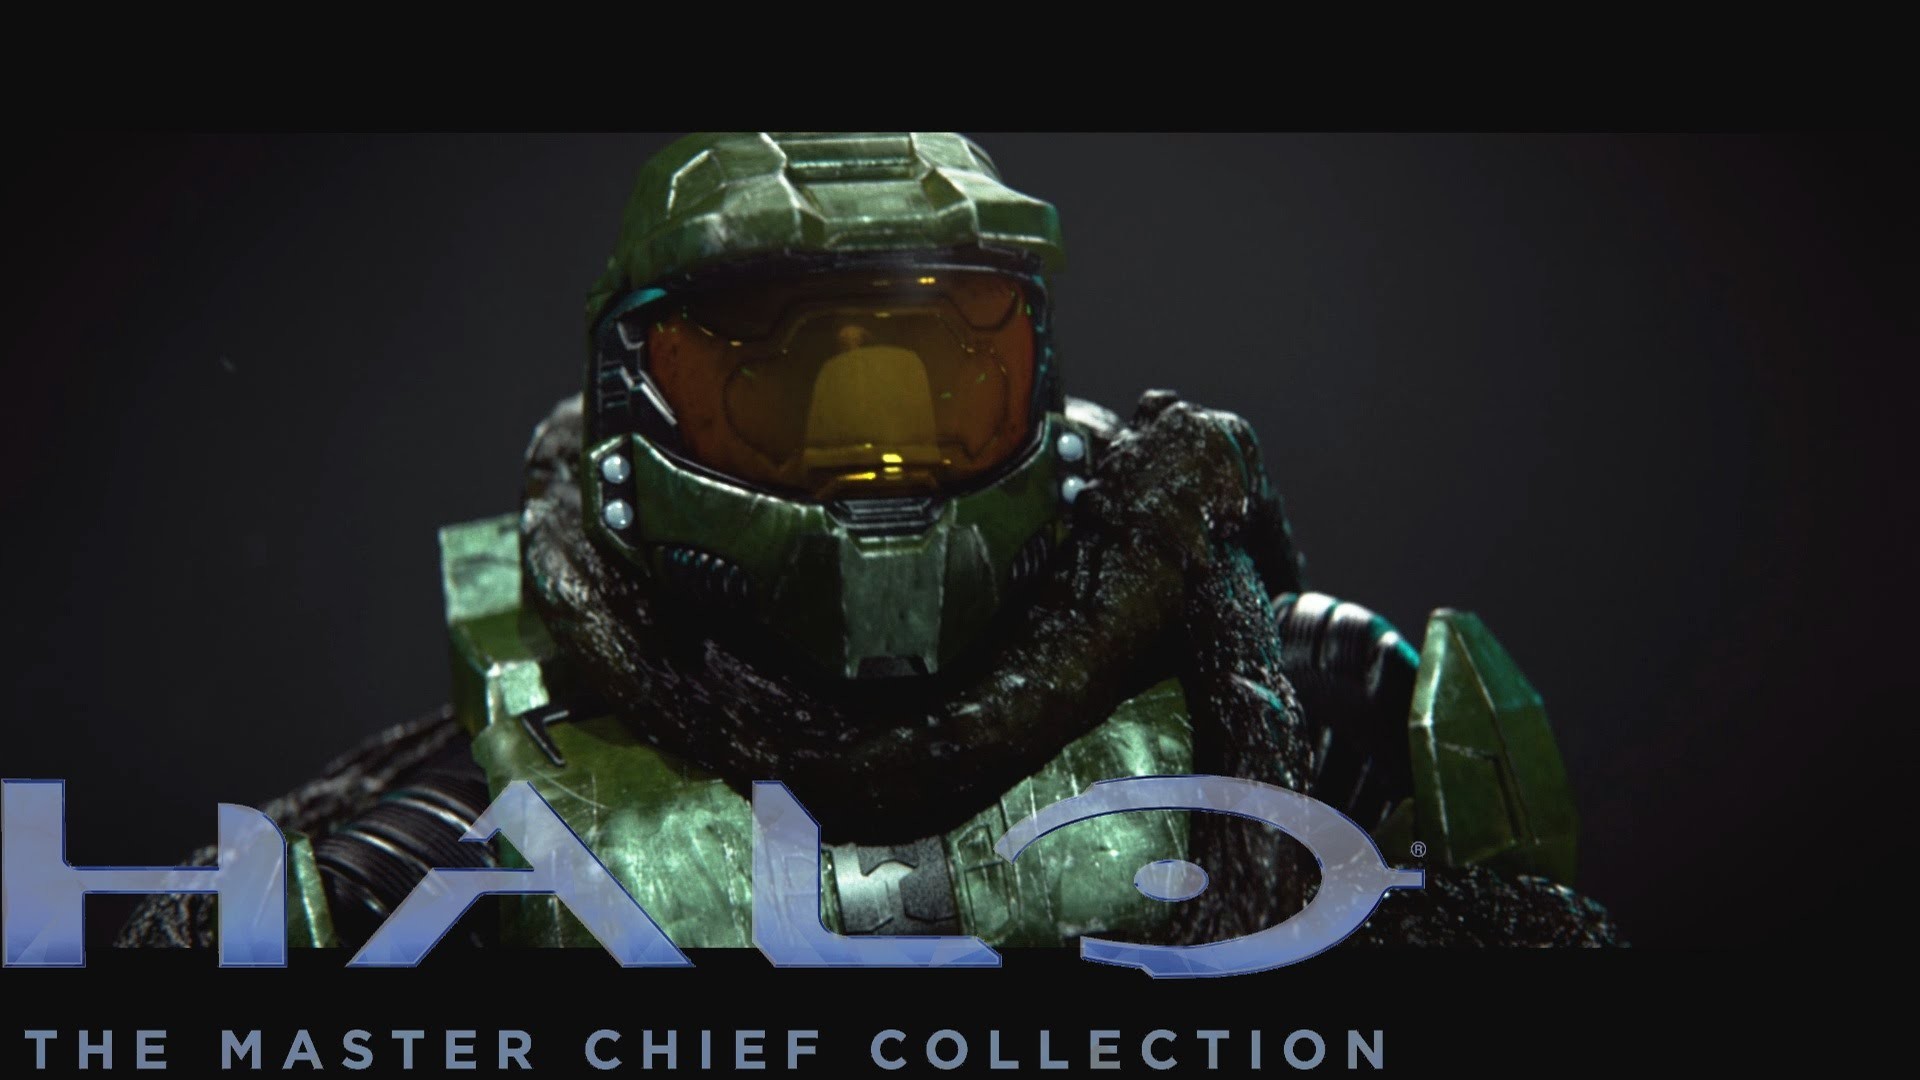 1920x1080 HALO Master Chief Collection GAMEPLAY - HALO 2 Anniversary CAMPAIGN  Gameplay 1080p 60fps! - YouTube